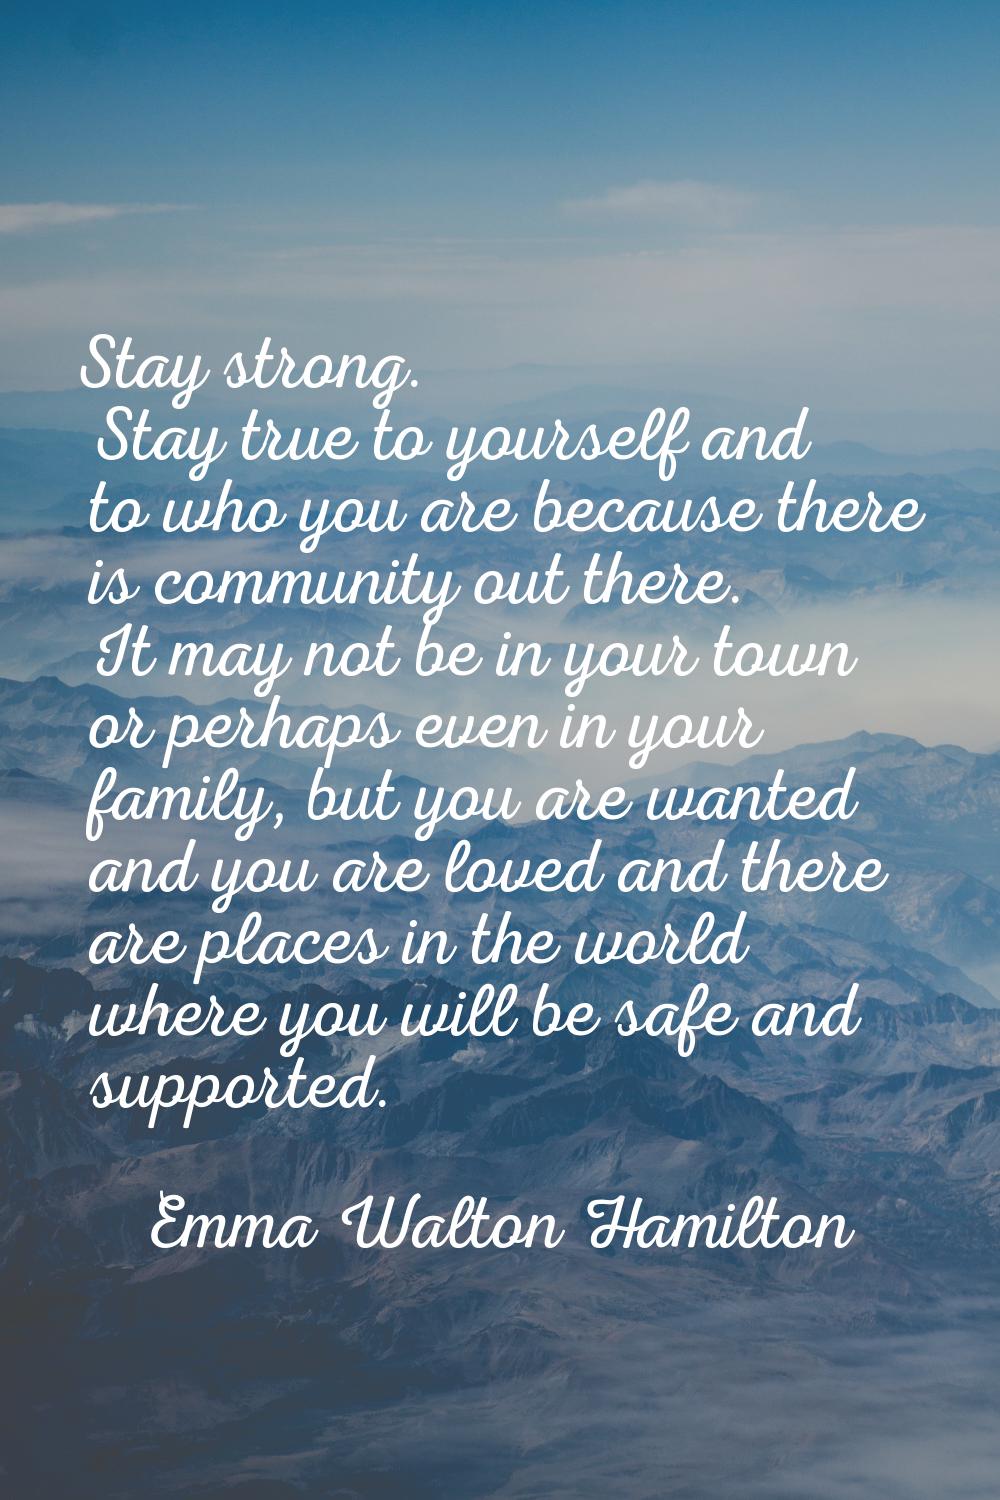 Stay strong. Stay true to yourself and to who you are because there is community out there. It may 